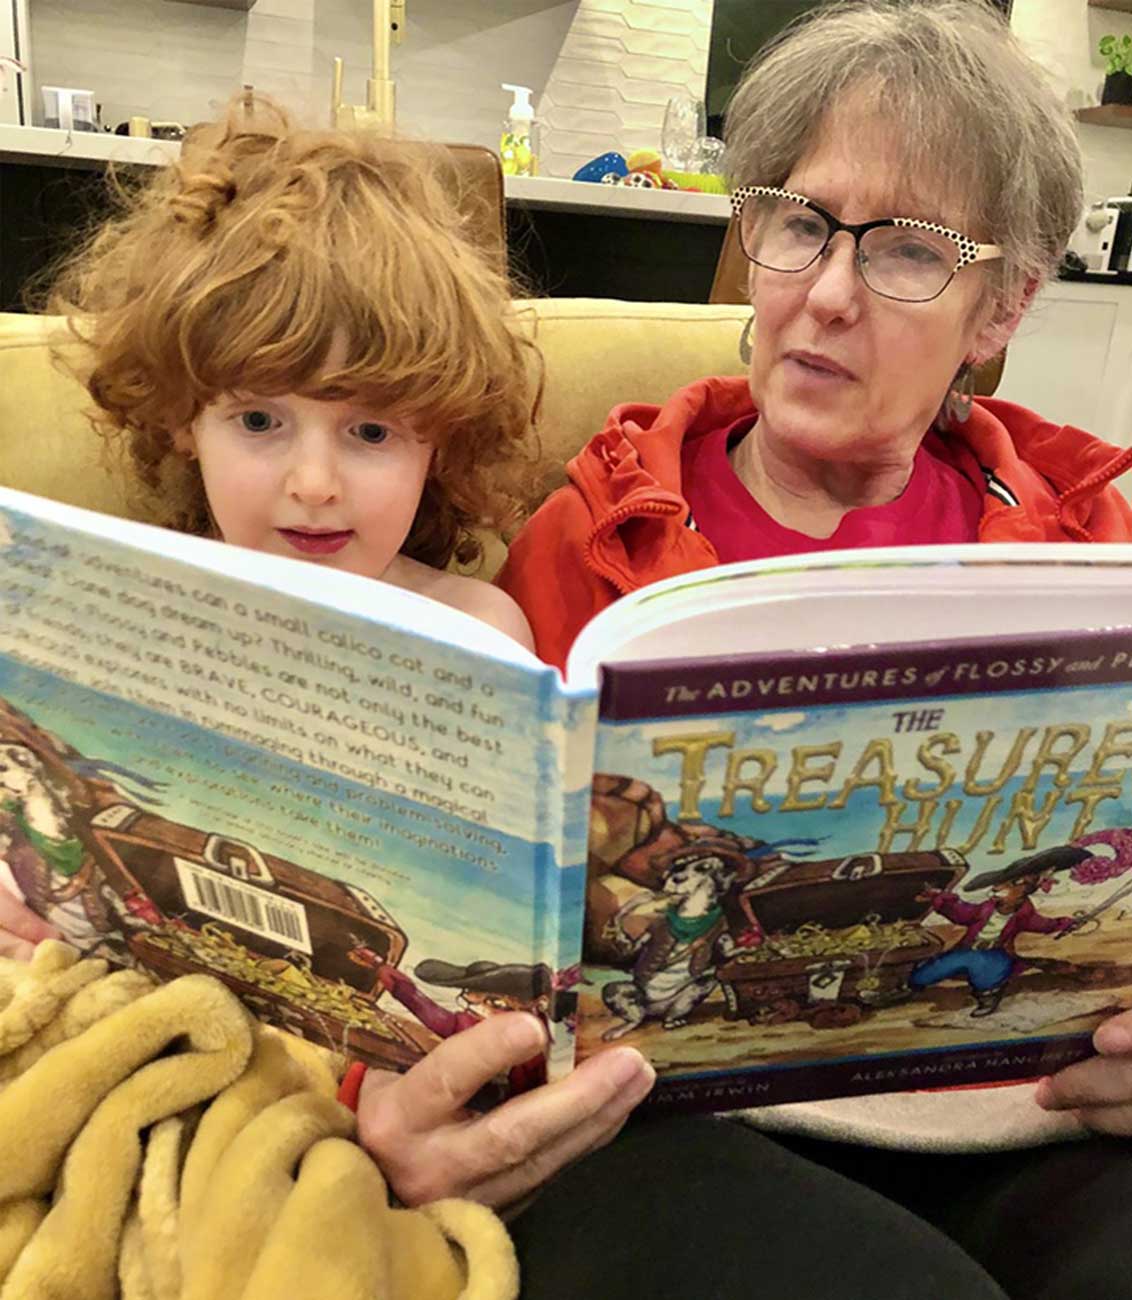 Archie and his grandma reading the children's book, The Adventures of Flossy and Pebbles the Dane: The Treasure Hunt